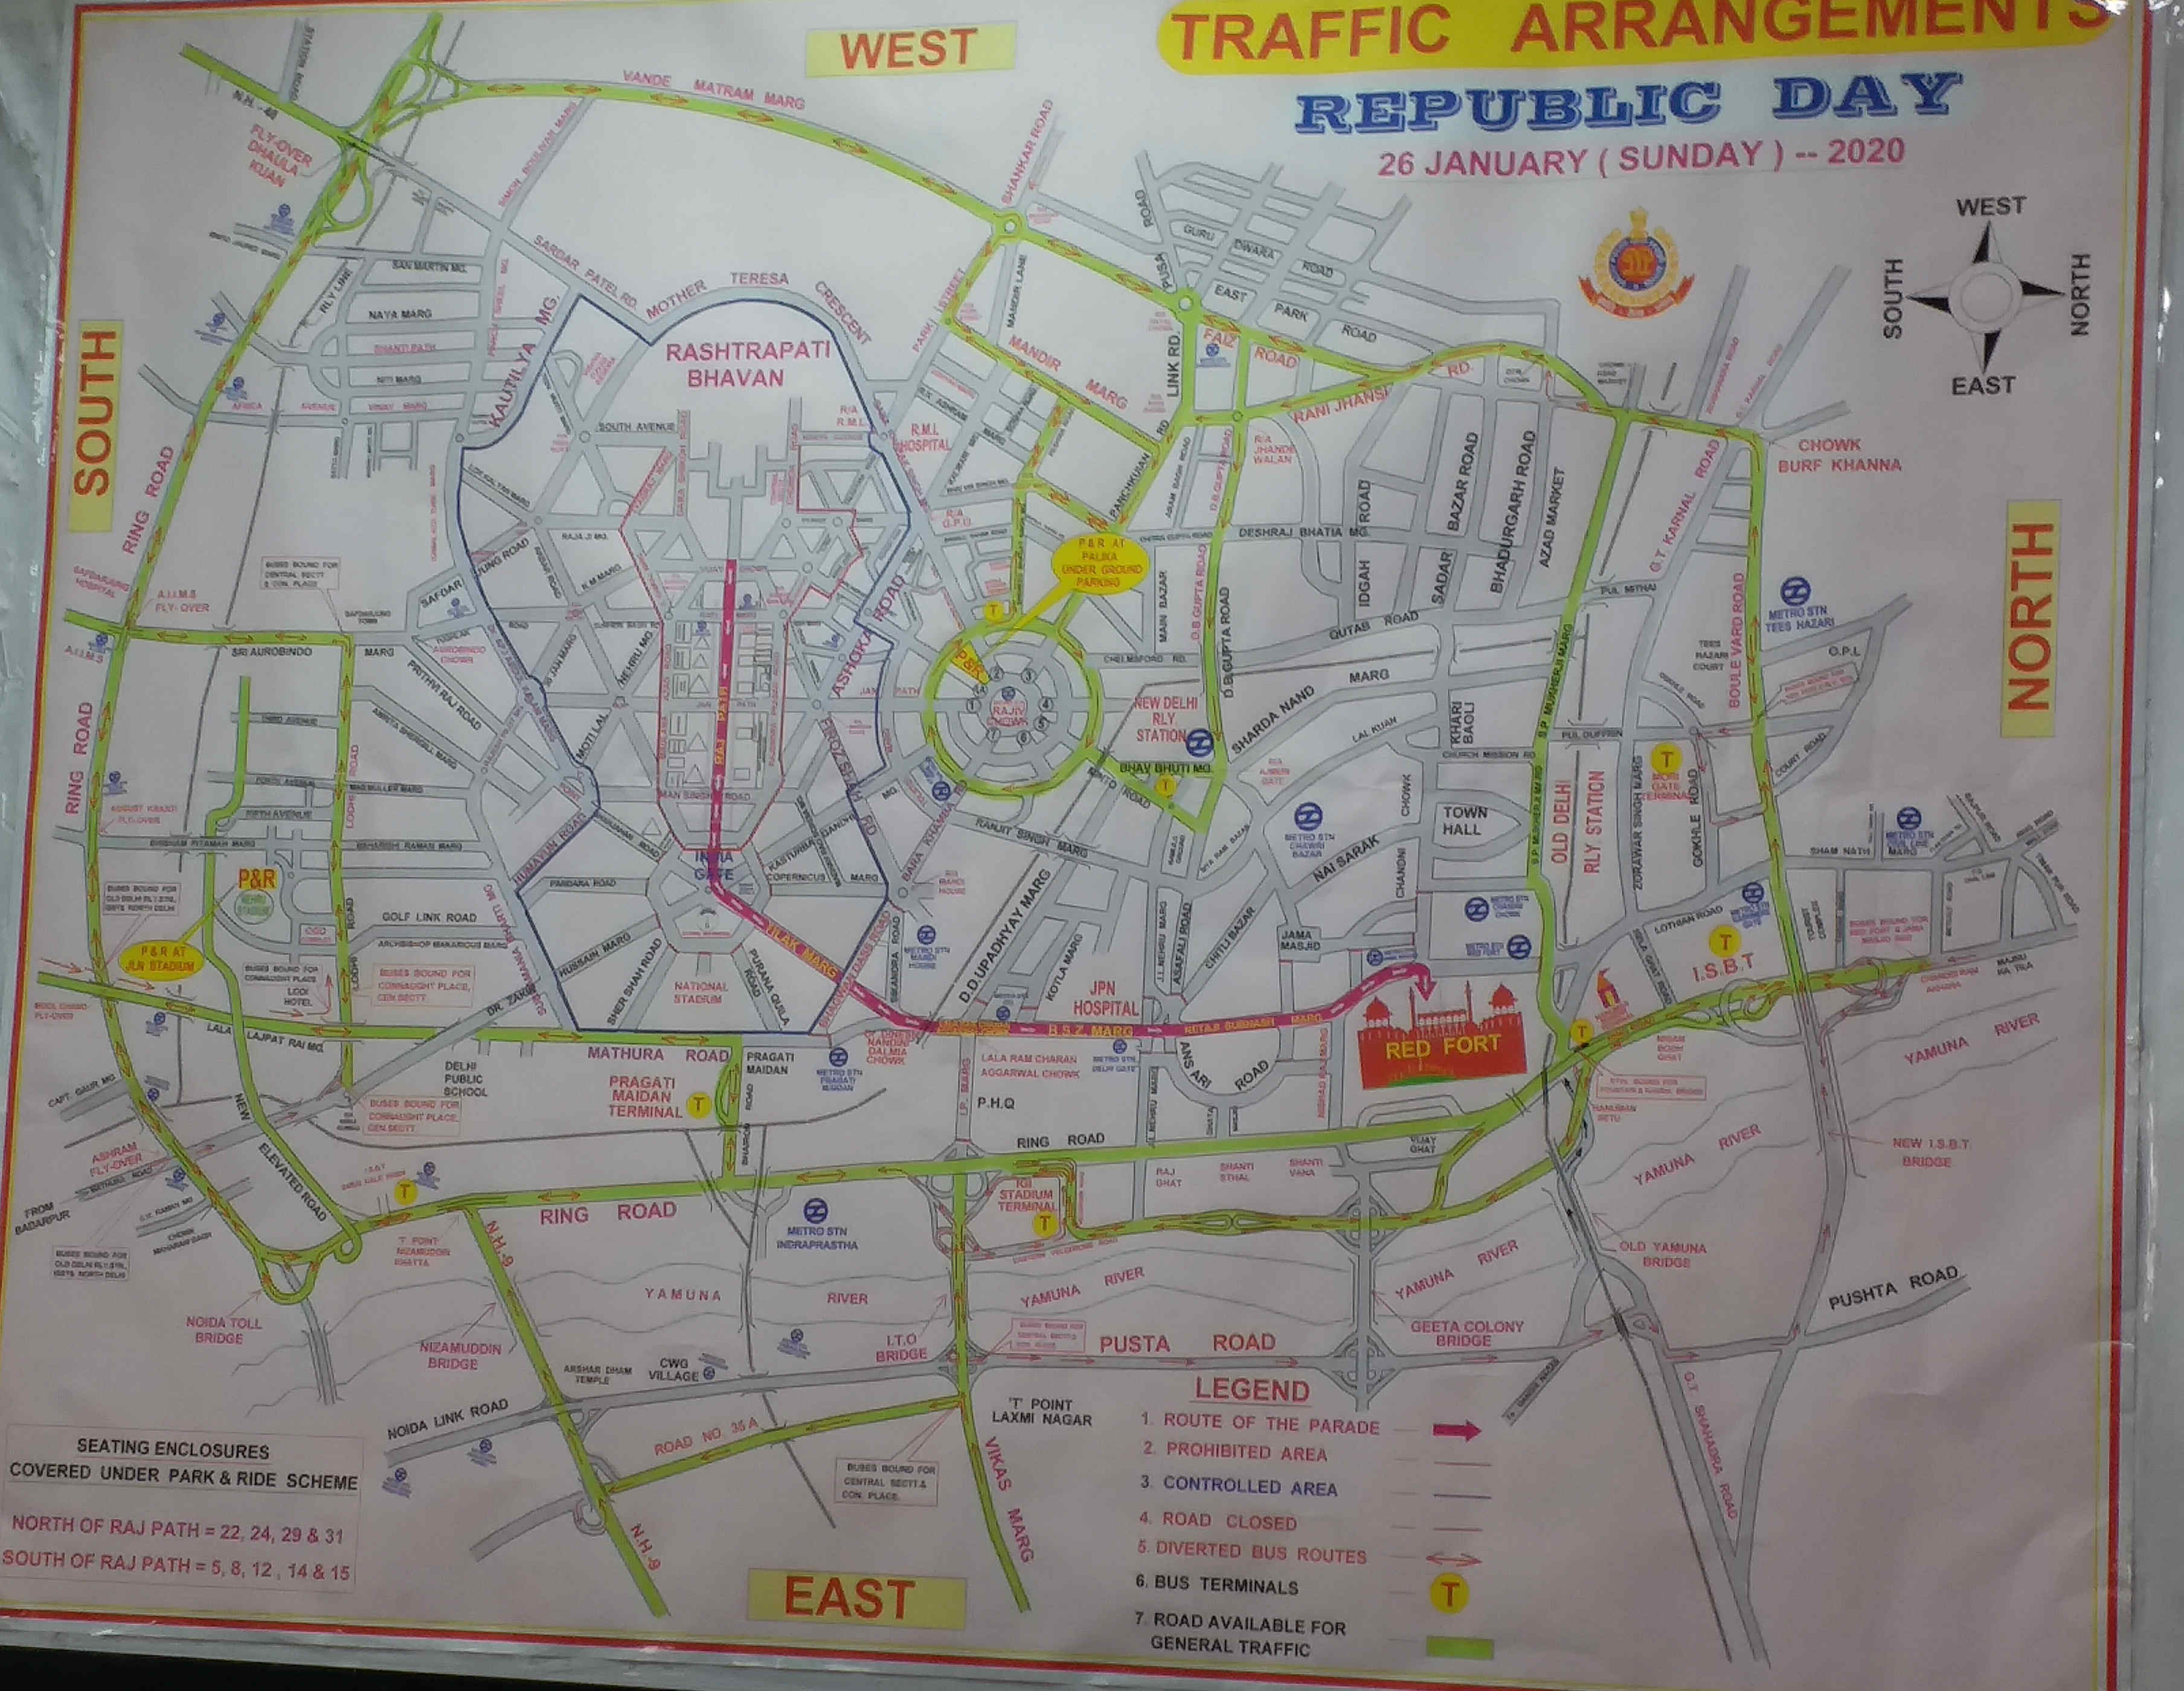 Special arrangements will be made by traffic police in Delhi regarding Republic Day